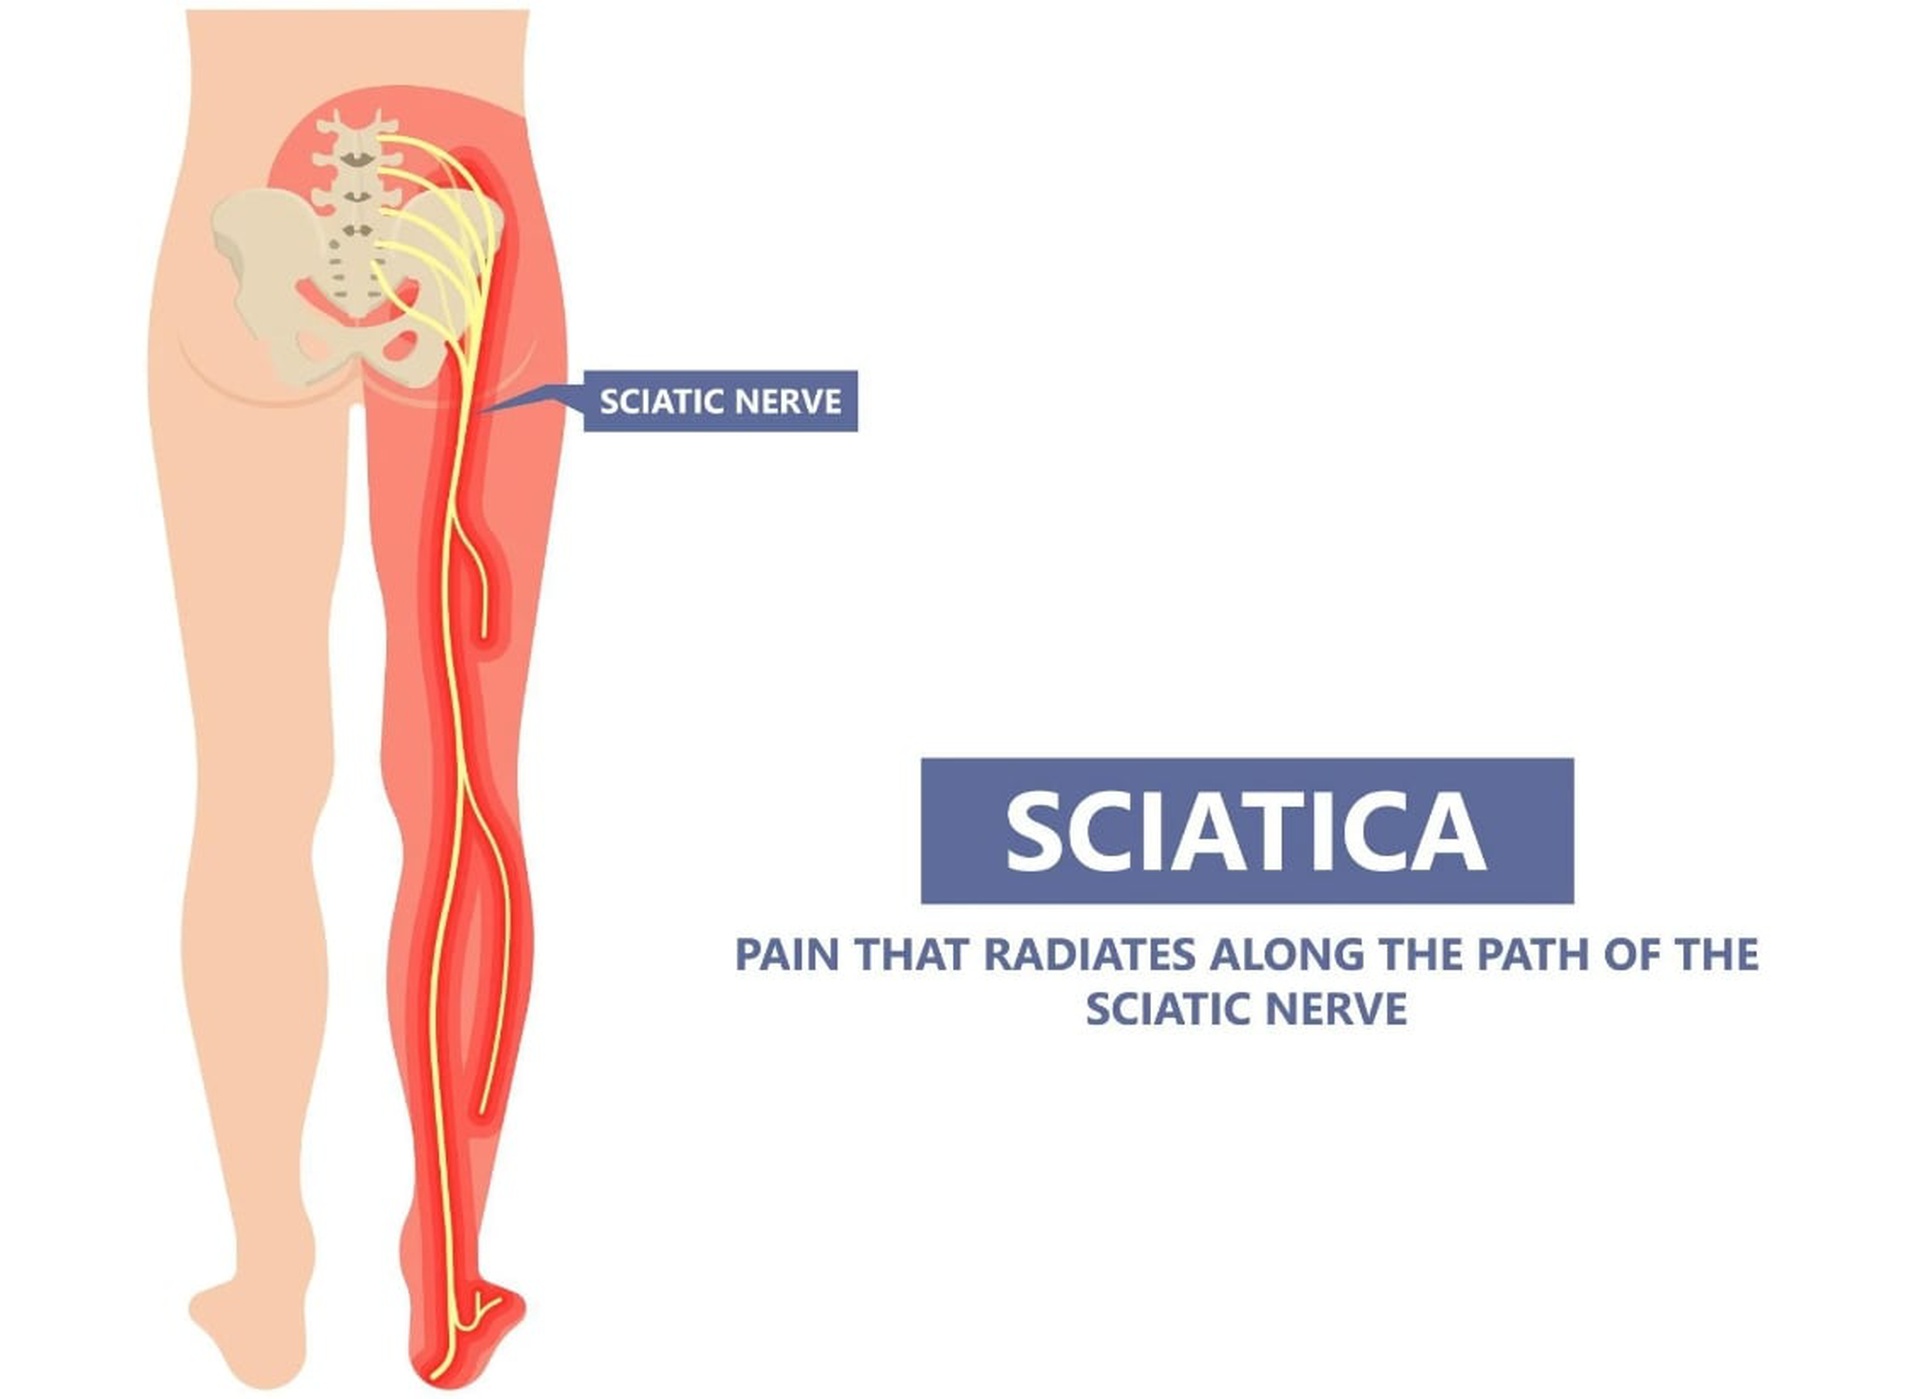 dry needling for sciatica pain